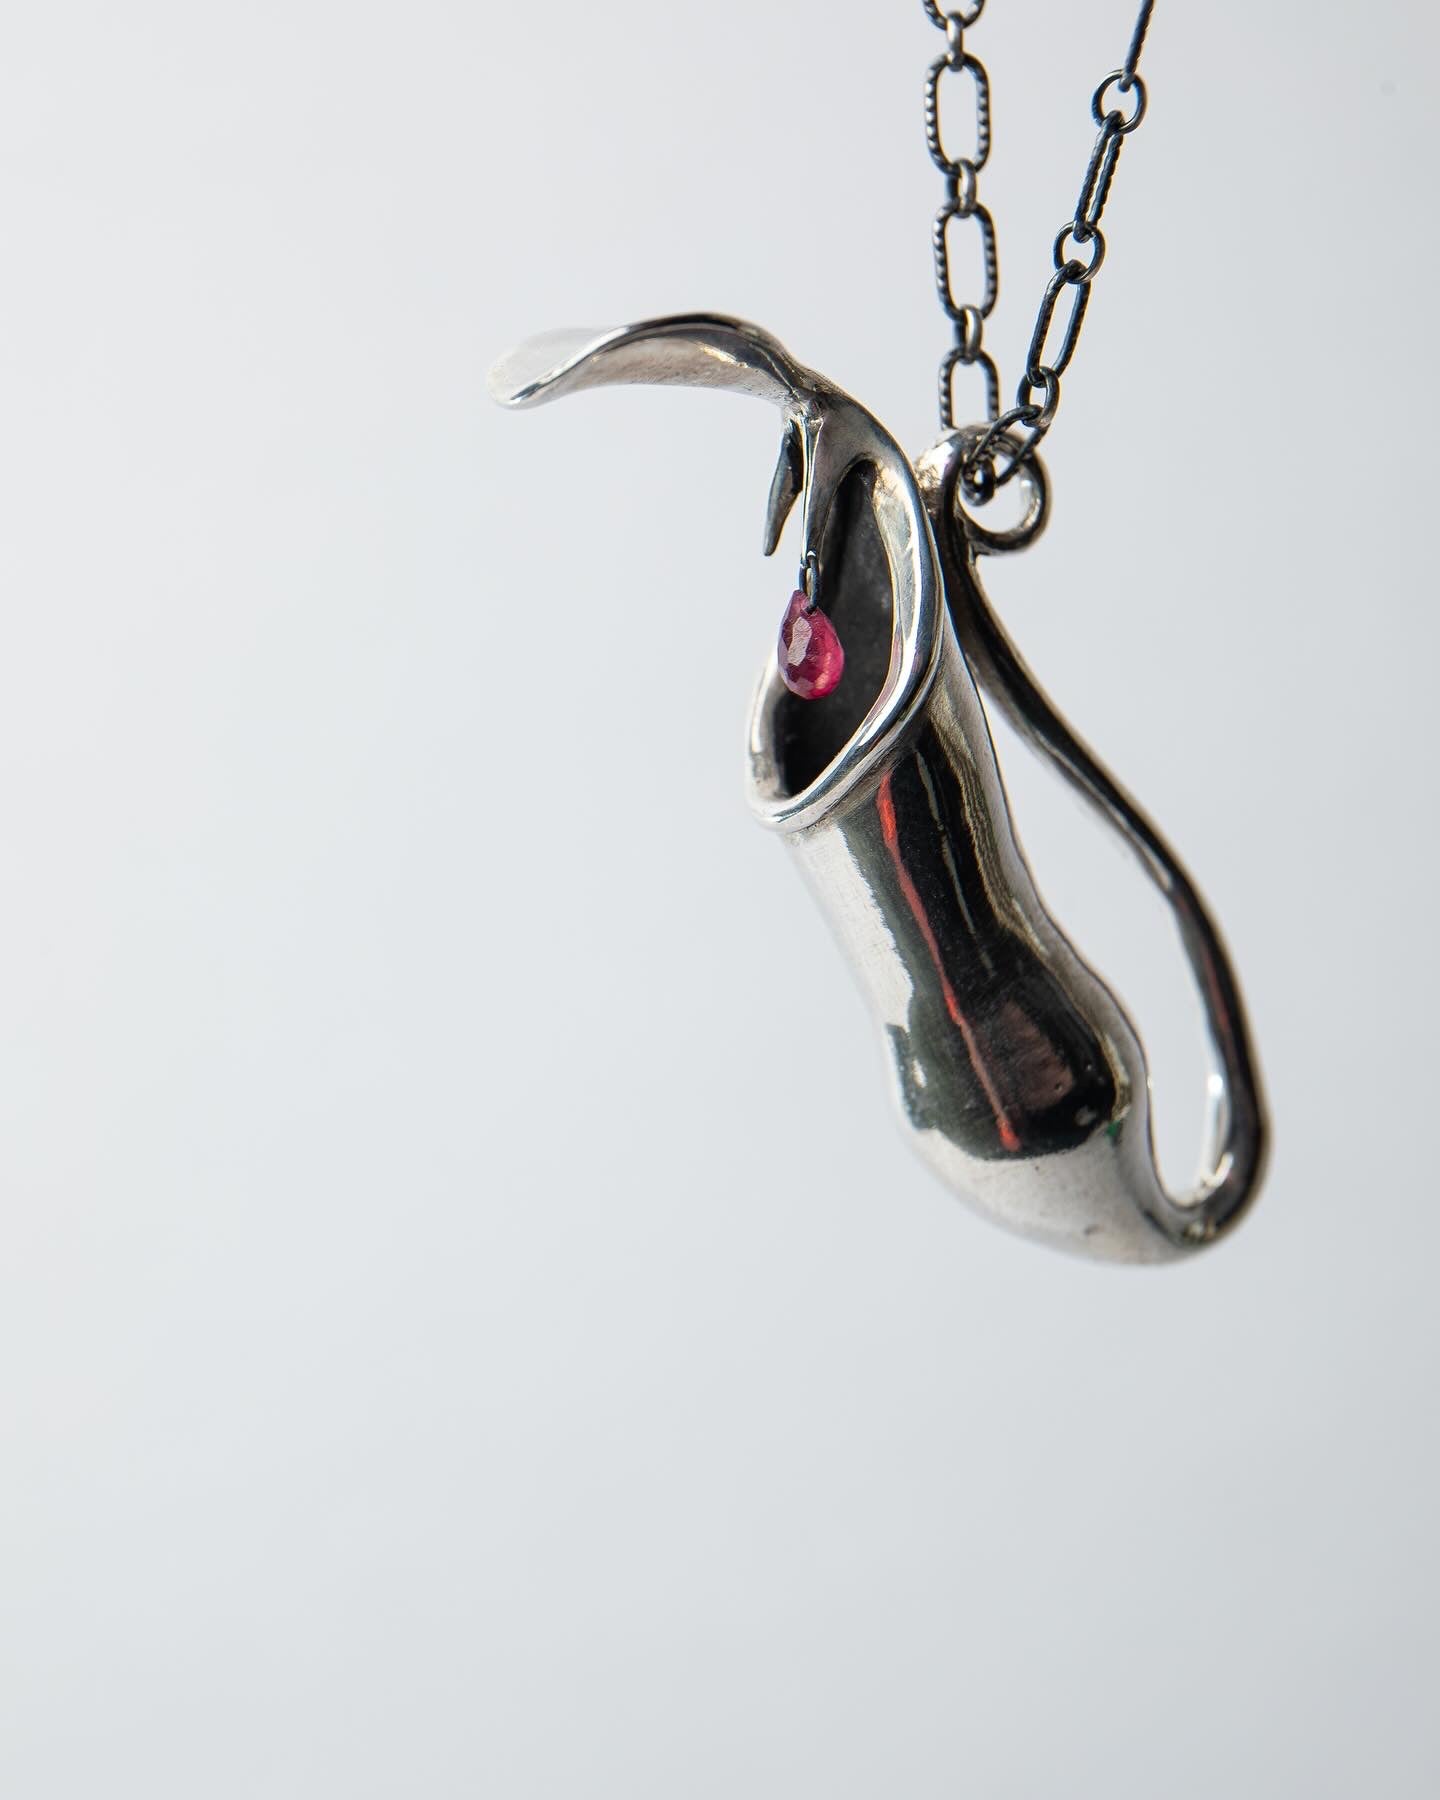 Fanged Pitcher Plant Pendant Necklace with ruby